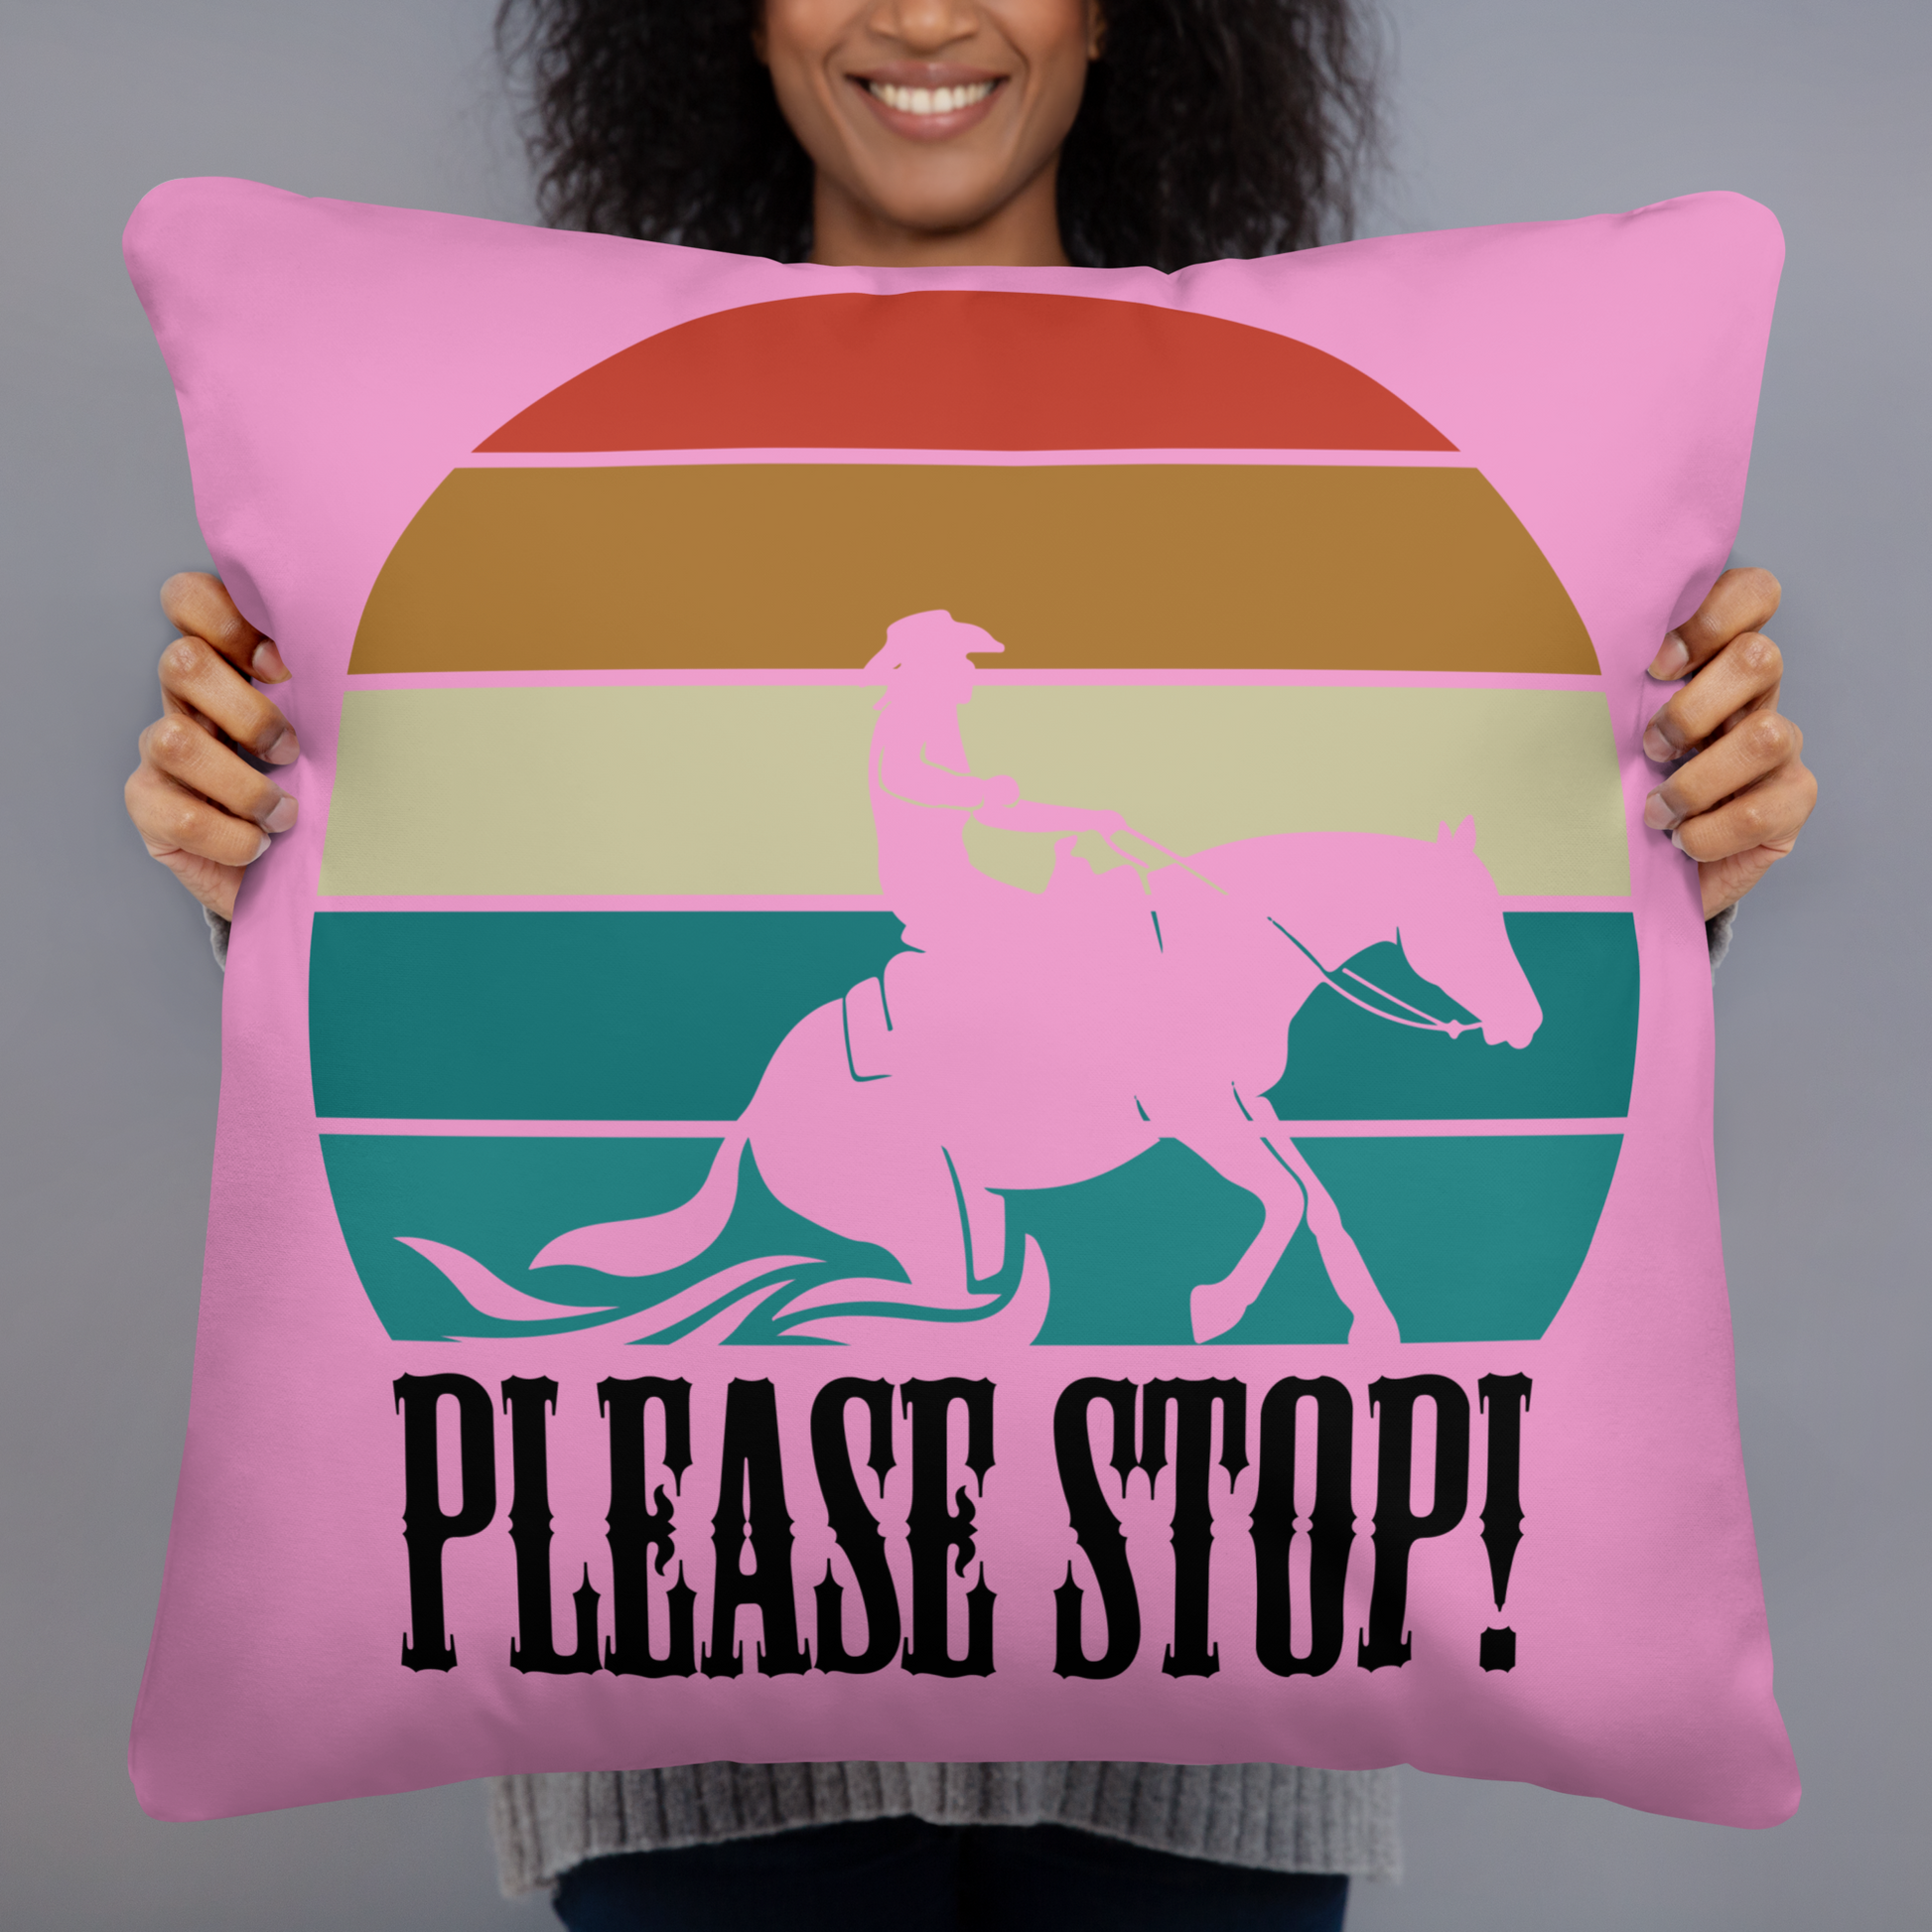 Hand Drawn Horse || Horse Square Throw Pillow - Design: "Stop"; Static Design; Personalizable Text